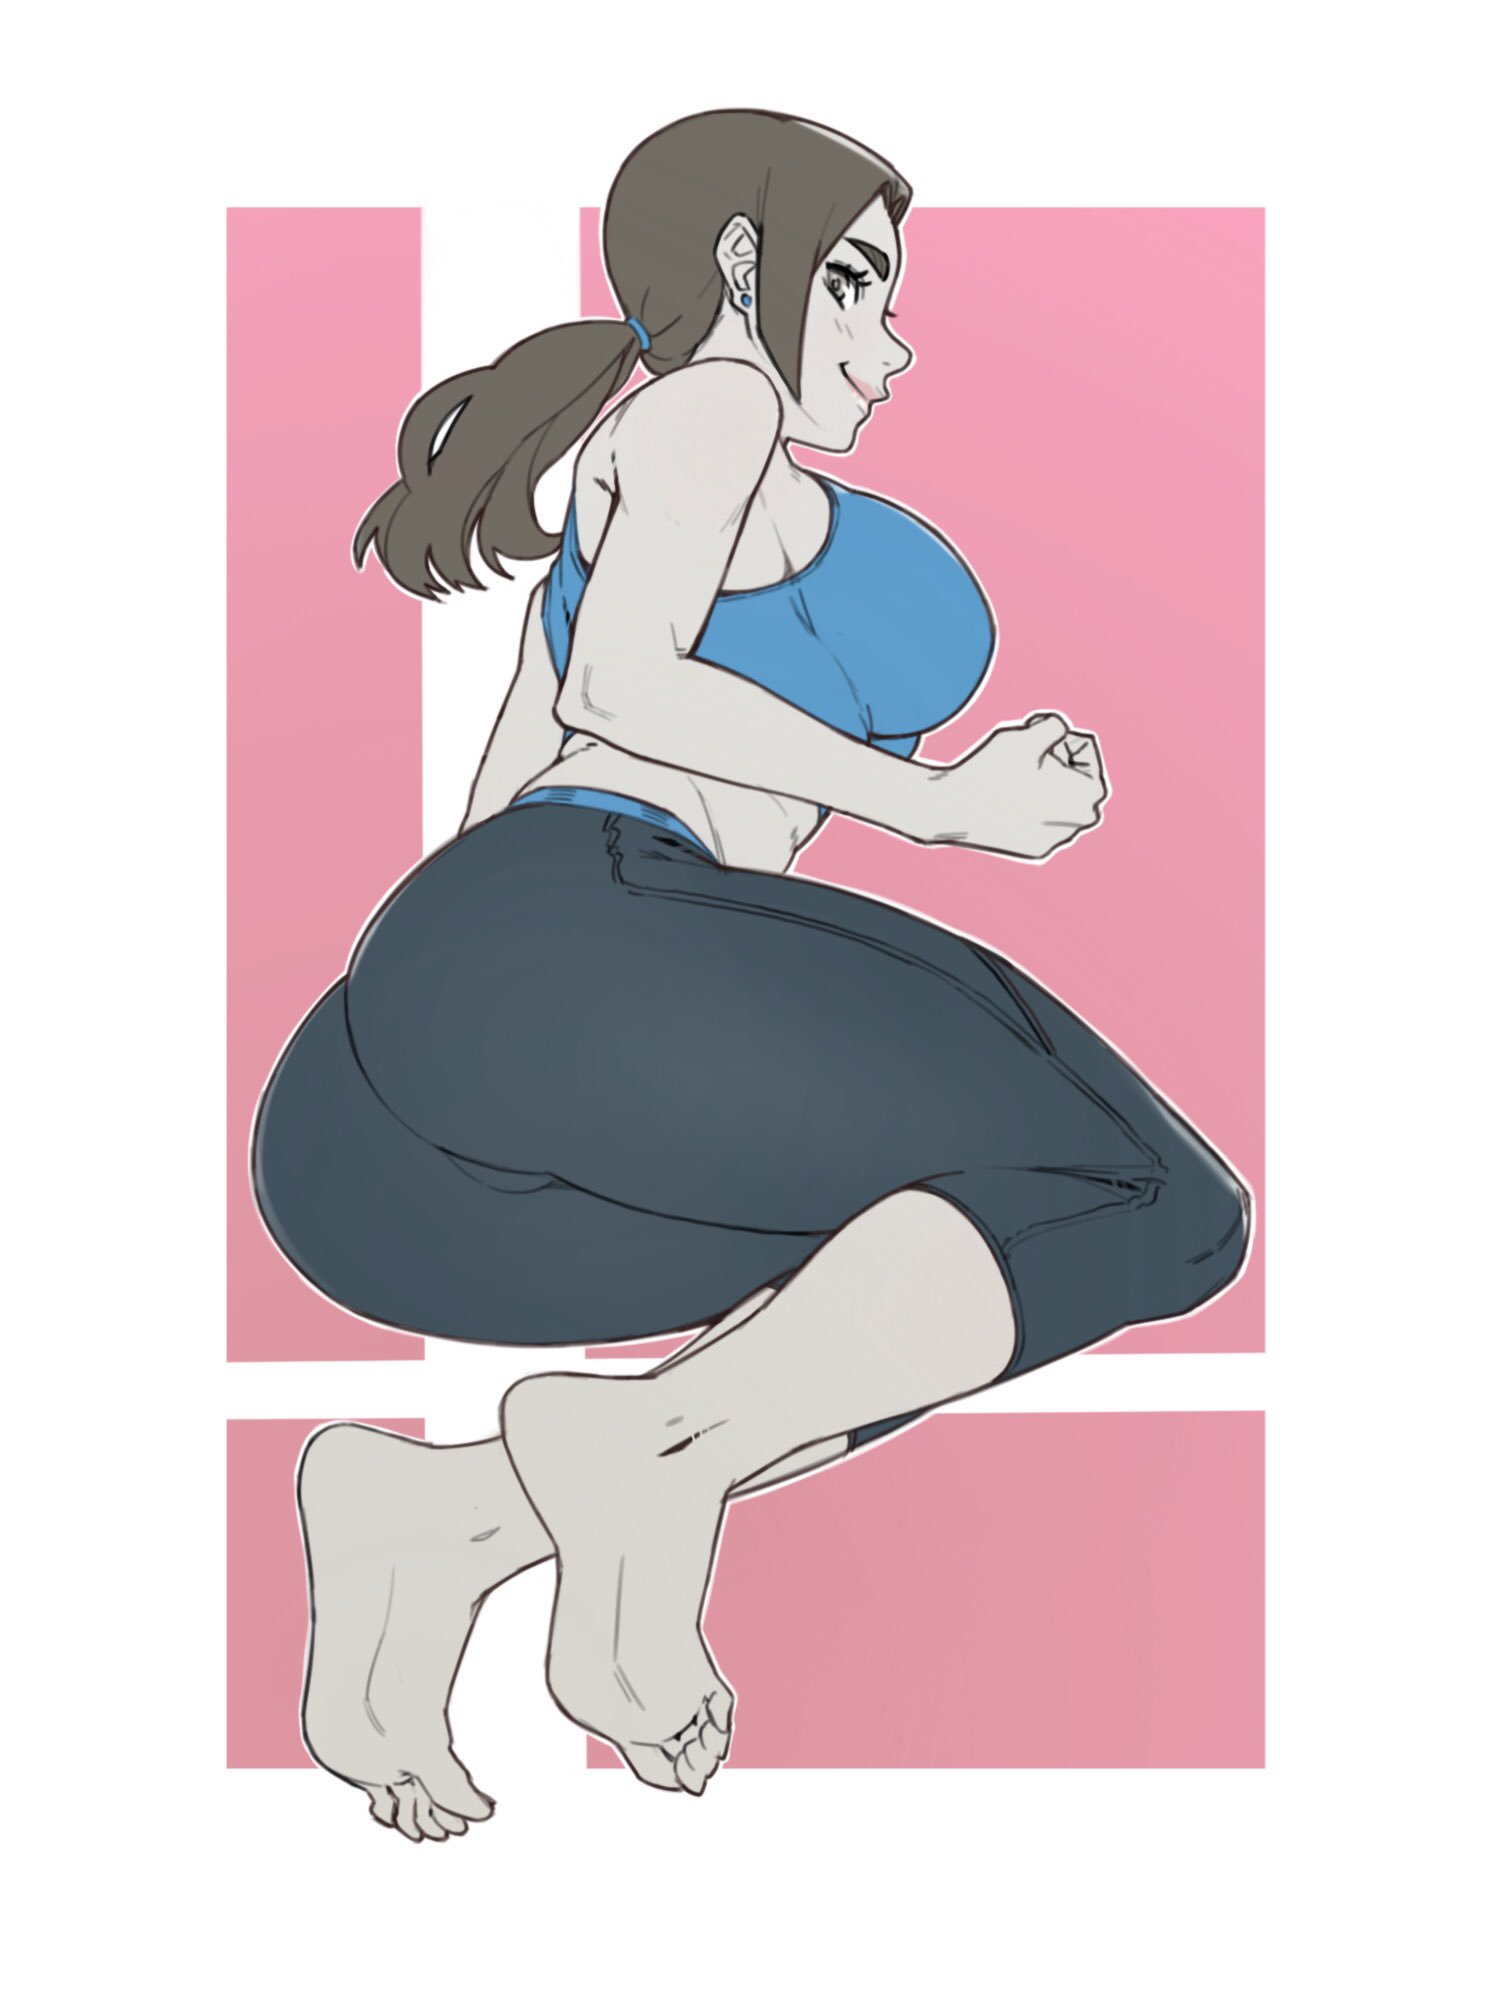 sound @hiatus on Twitter: "More like Wii THICC Trainer, amirite? #fanart # art #wiifittrainer #drawing #sketch #doodle #SmashBrosUltimate #SmashBros  #SSBU https://t.co/UeHQEjIPHt" / Twitter